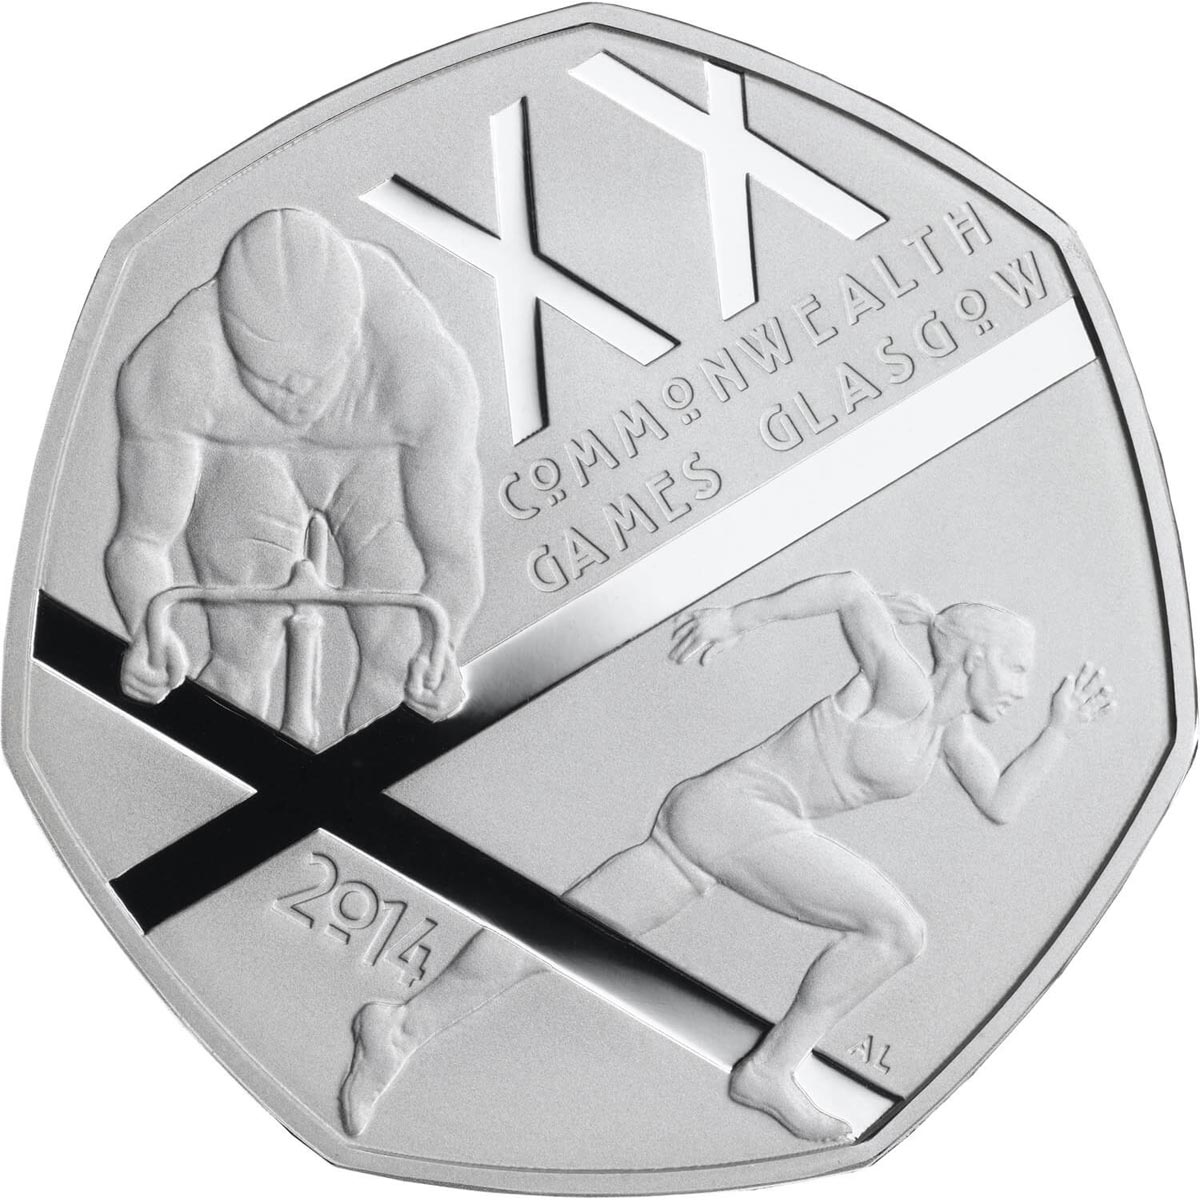 Image of 50 pence coin - The Glasgow 2014 Commonwealth Games | United Kingdom 2014.  The Copper–Nickel (CuNi) coin is of UNC quality.